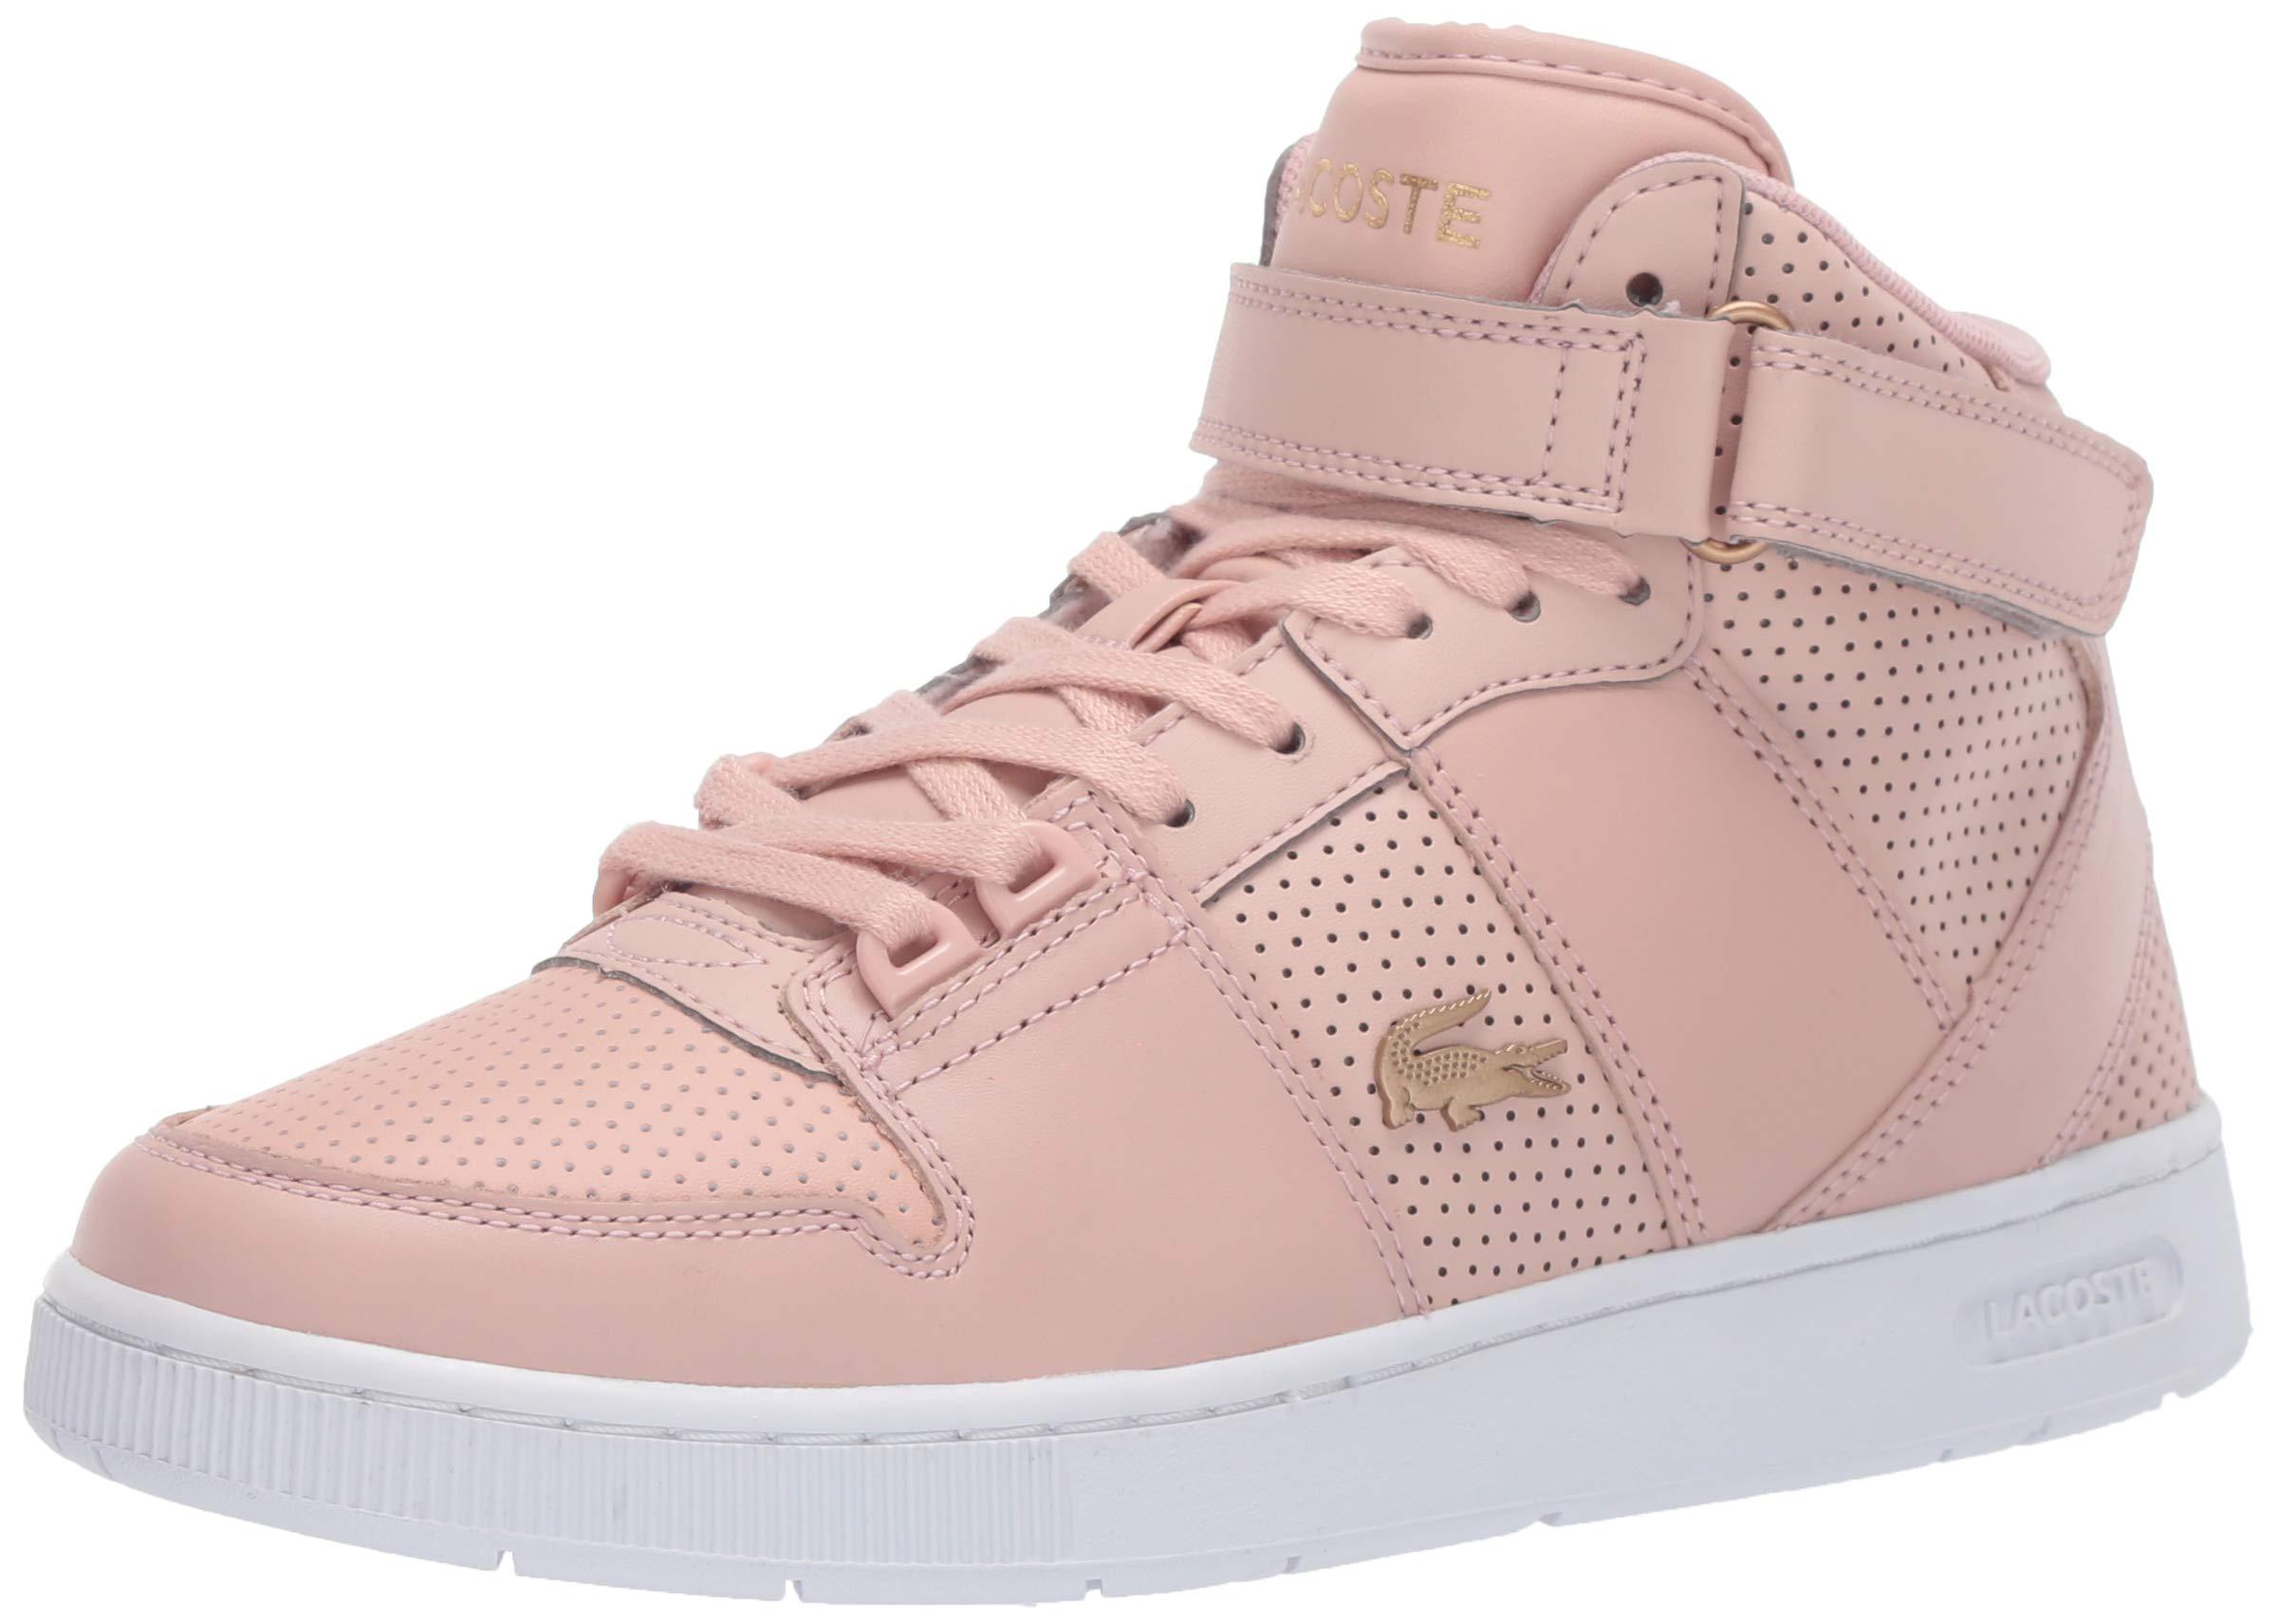 Lacoste Leather Tramline Mid Sneaker in Natural/White (Pink) | Lyst